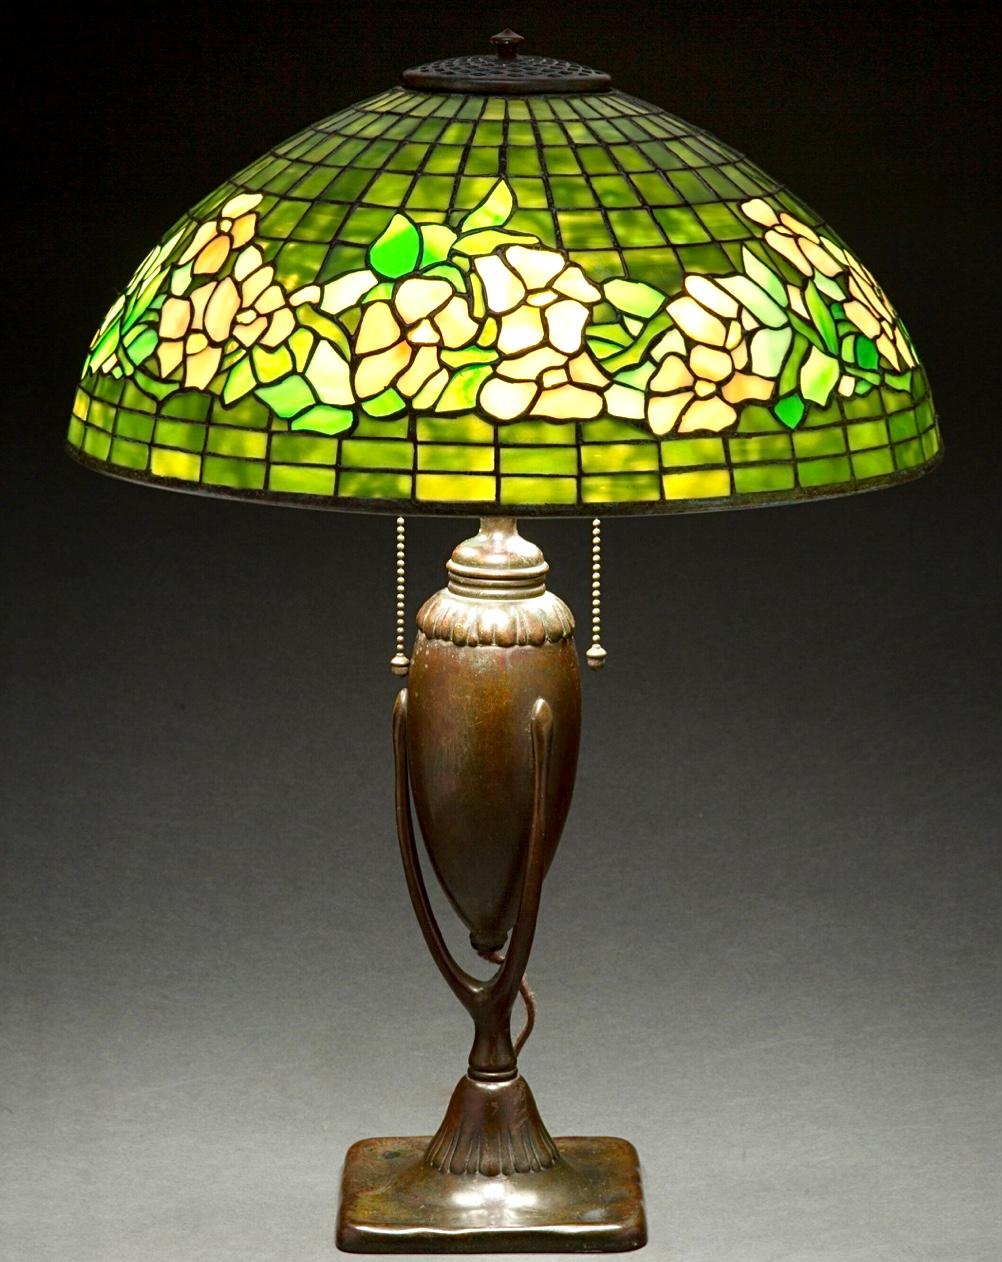 Tiffany Studios Leaded glass and patinated bronze banded Dogwood table lamp, circa 1910 Art Nouveau Art Deco. 

A beautiful example of Art Nouveau era Florian and geometric hand crafted leaded glass lighting. The shade with a rare lime green,